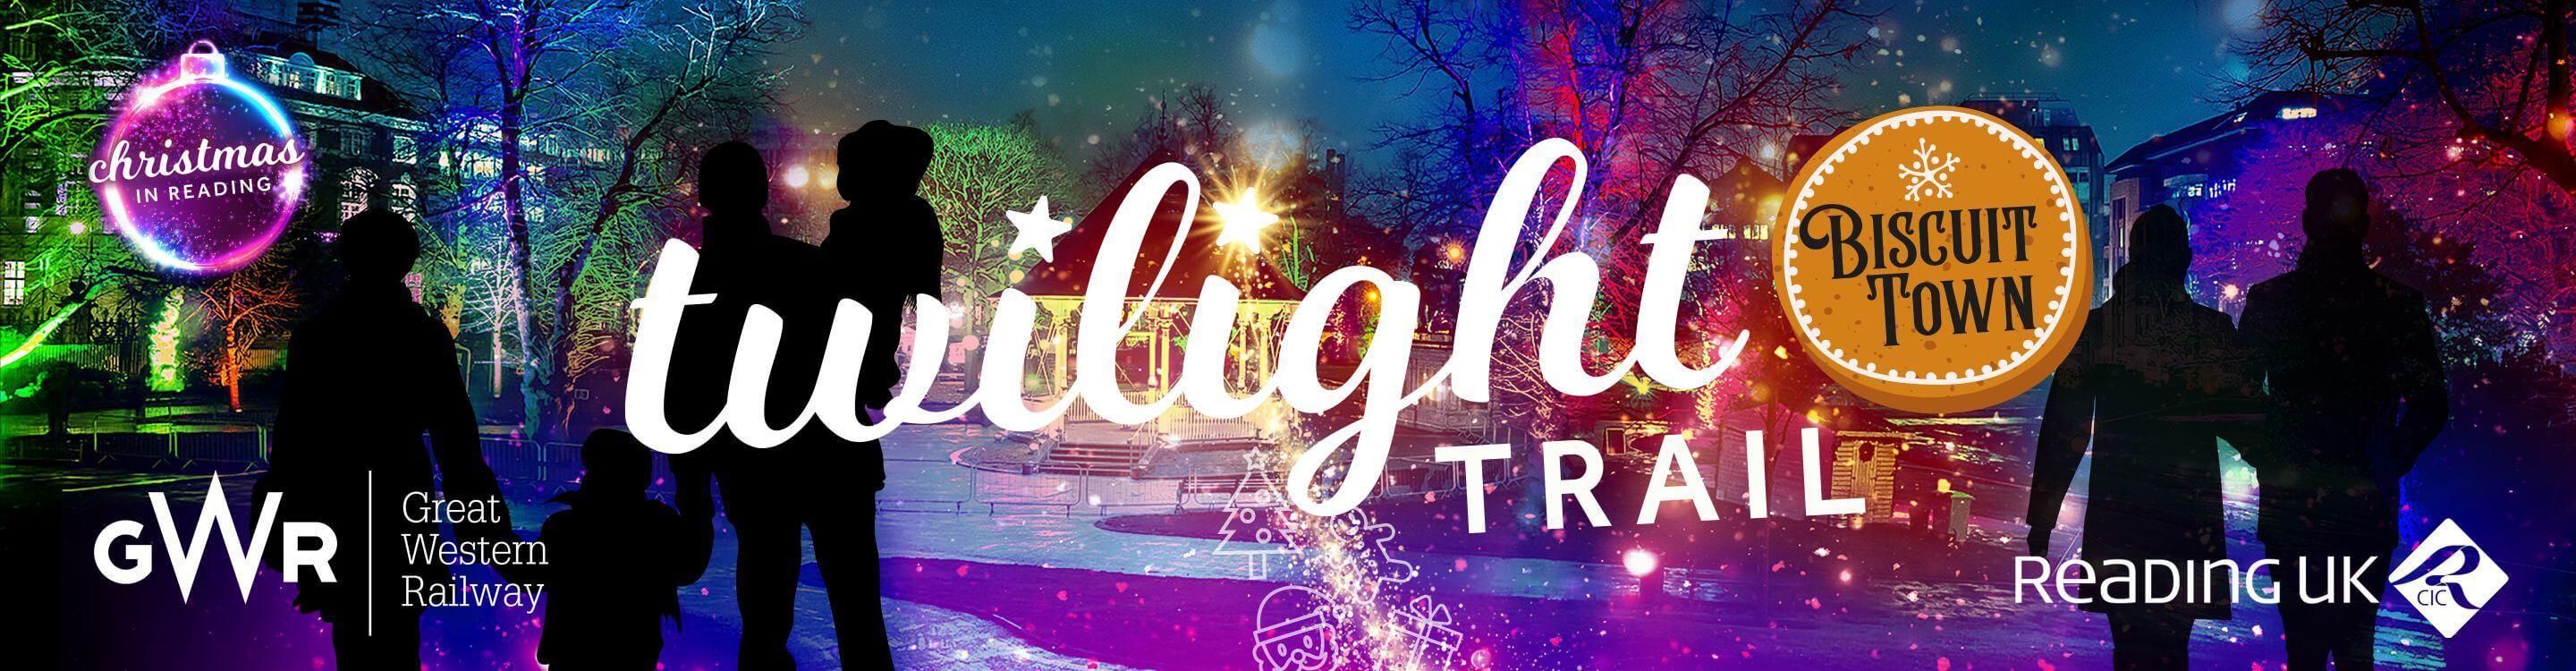 Promotional poster for the Twilight Trail event in Reading